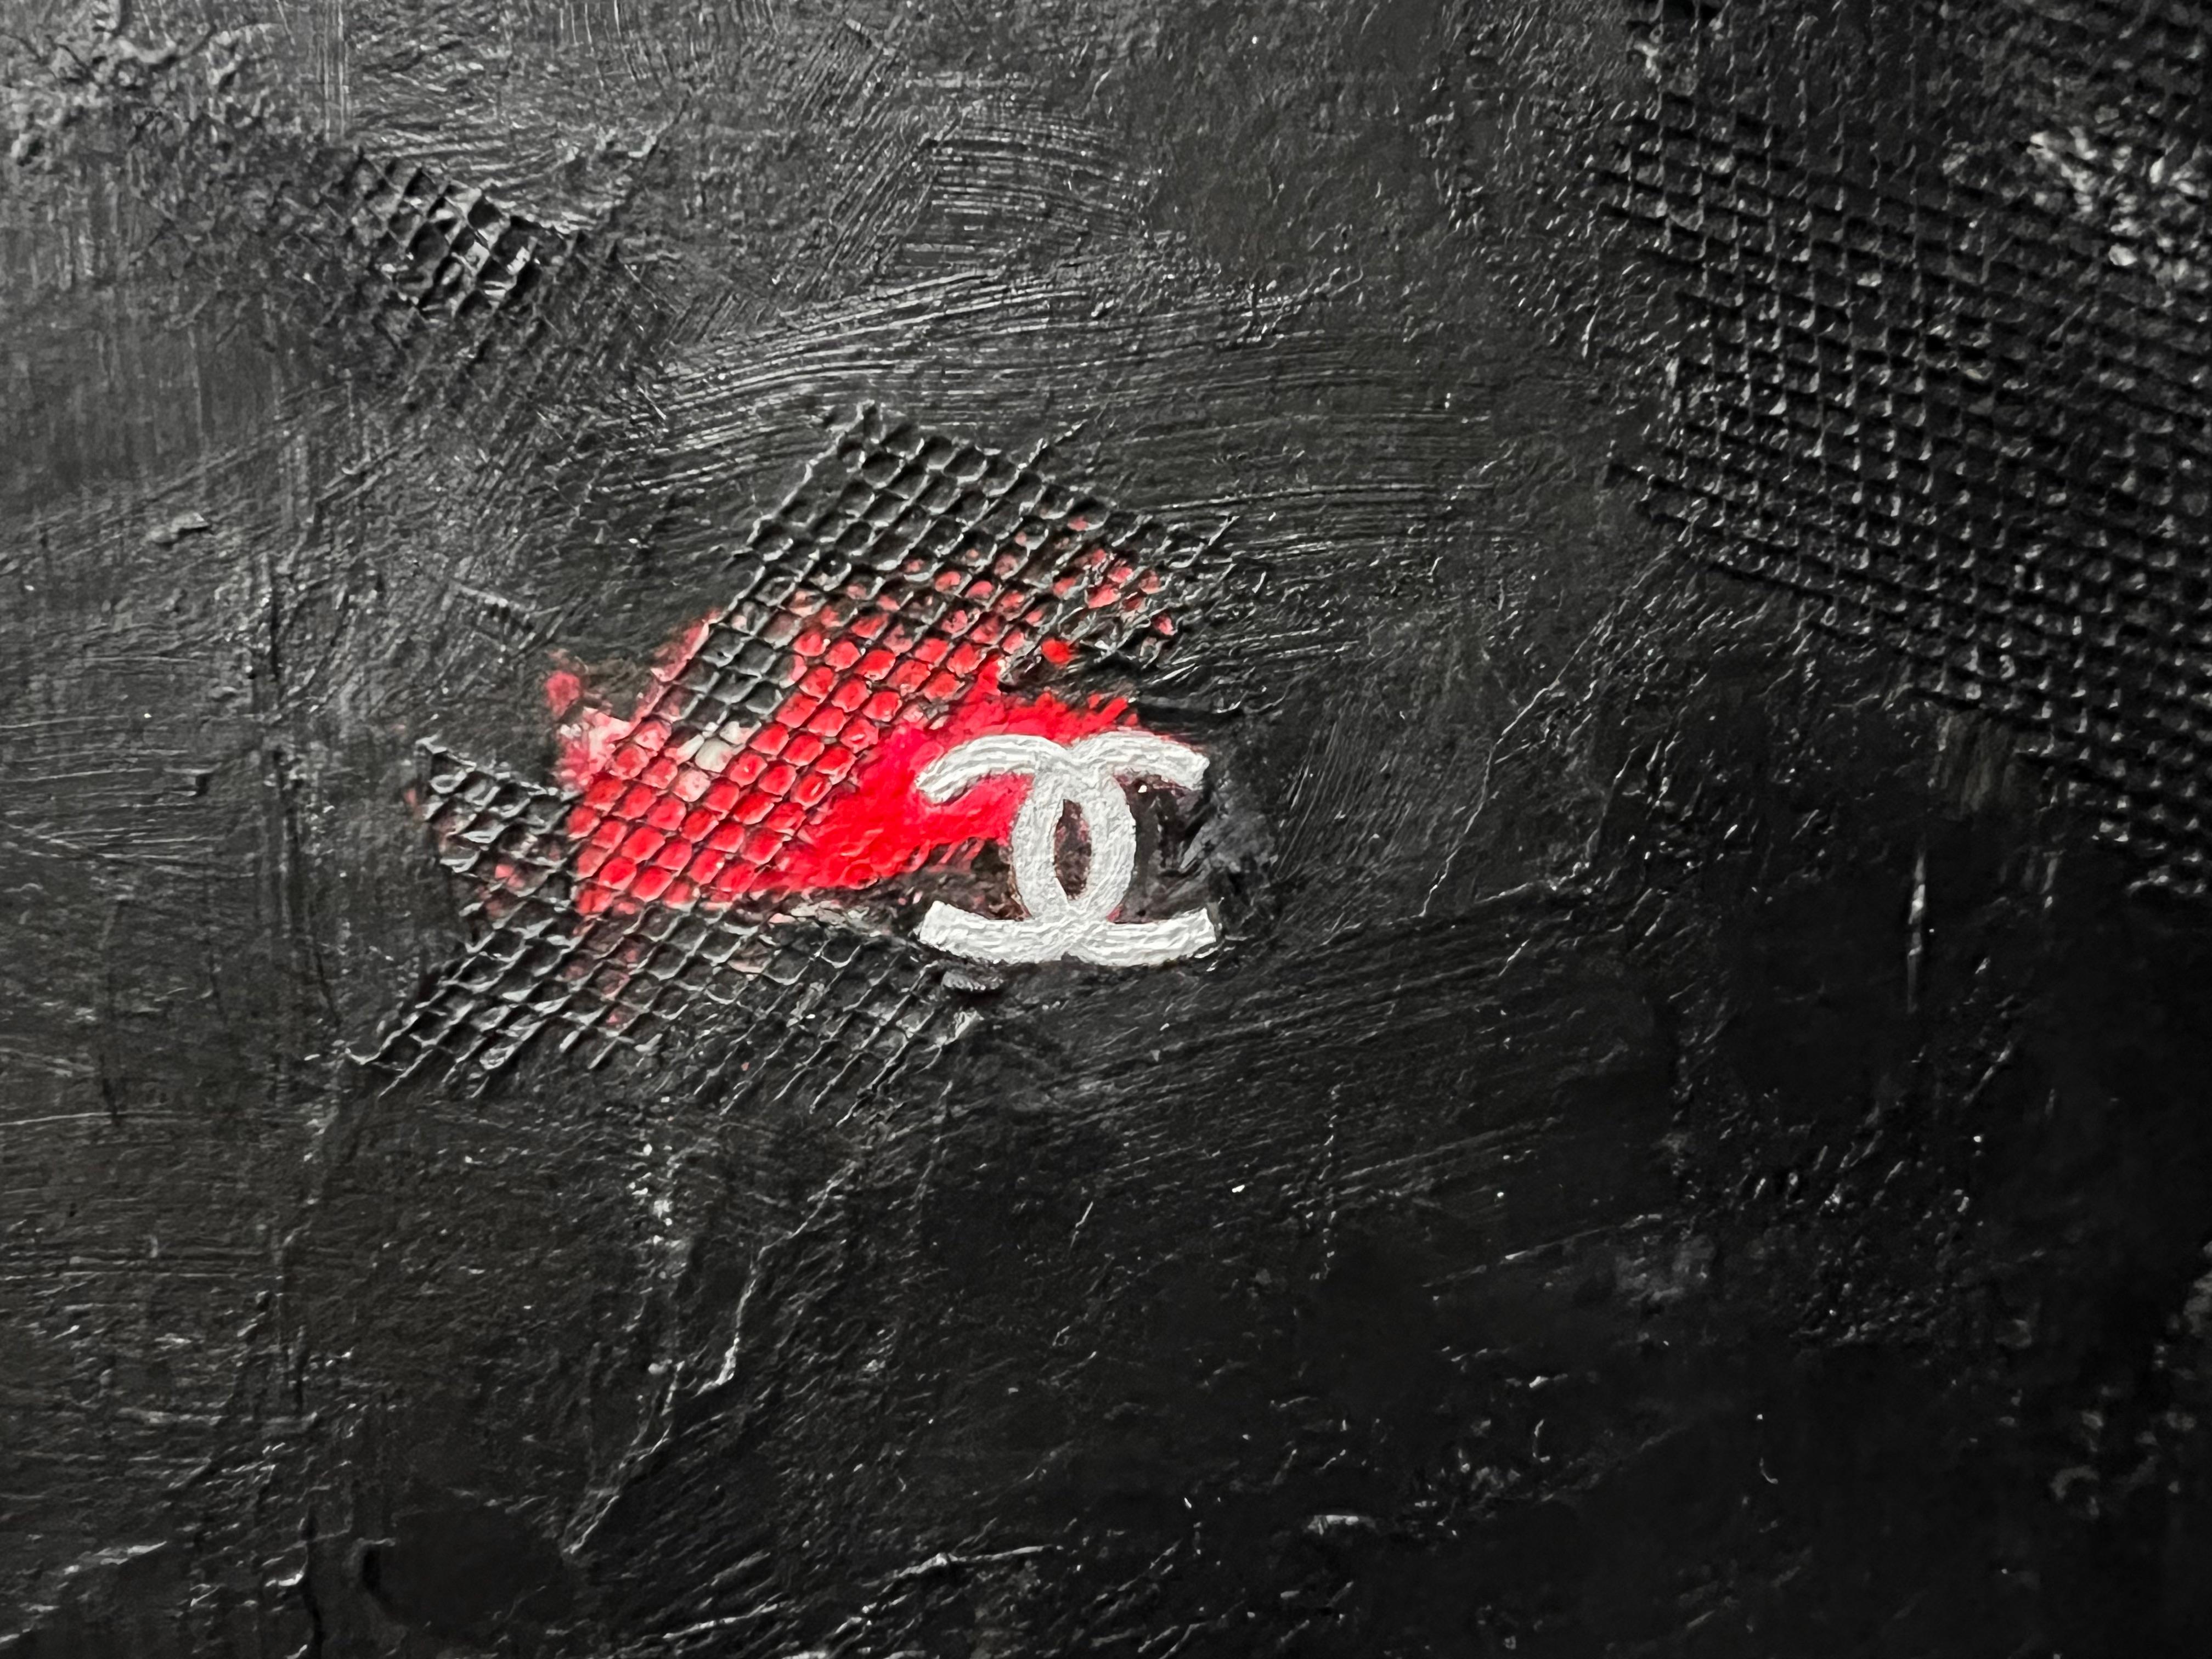 Homage to the iconic Chanel Brand. This original artwork on paper combines textured brush strokes and textile collage elements. Surrounded by heavy texture, the focal point is a detailed Chanel logo with a touch of red adding visual interest to the